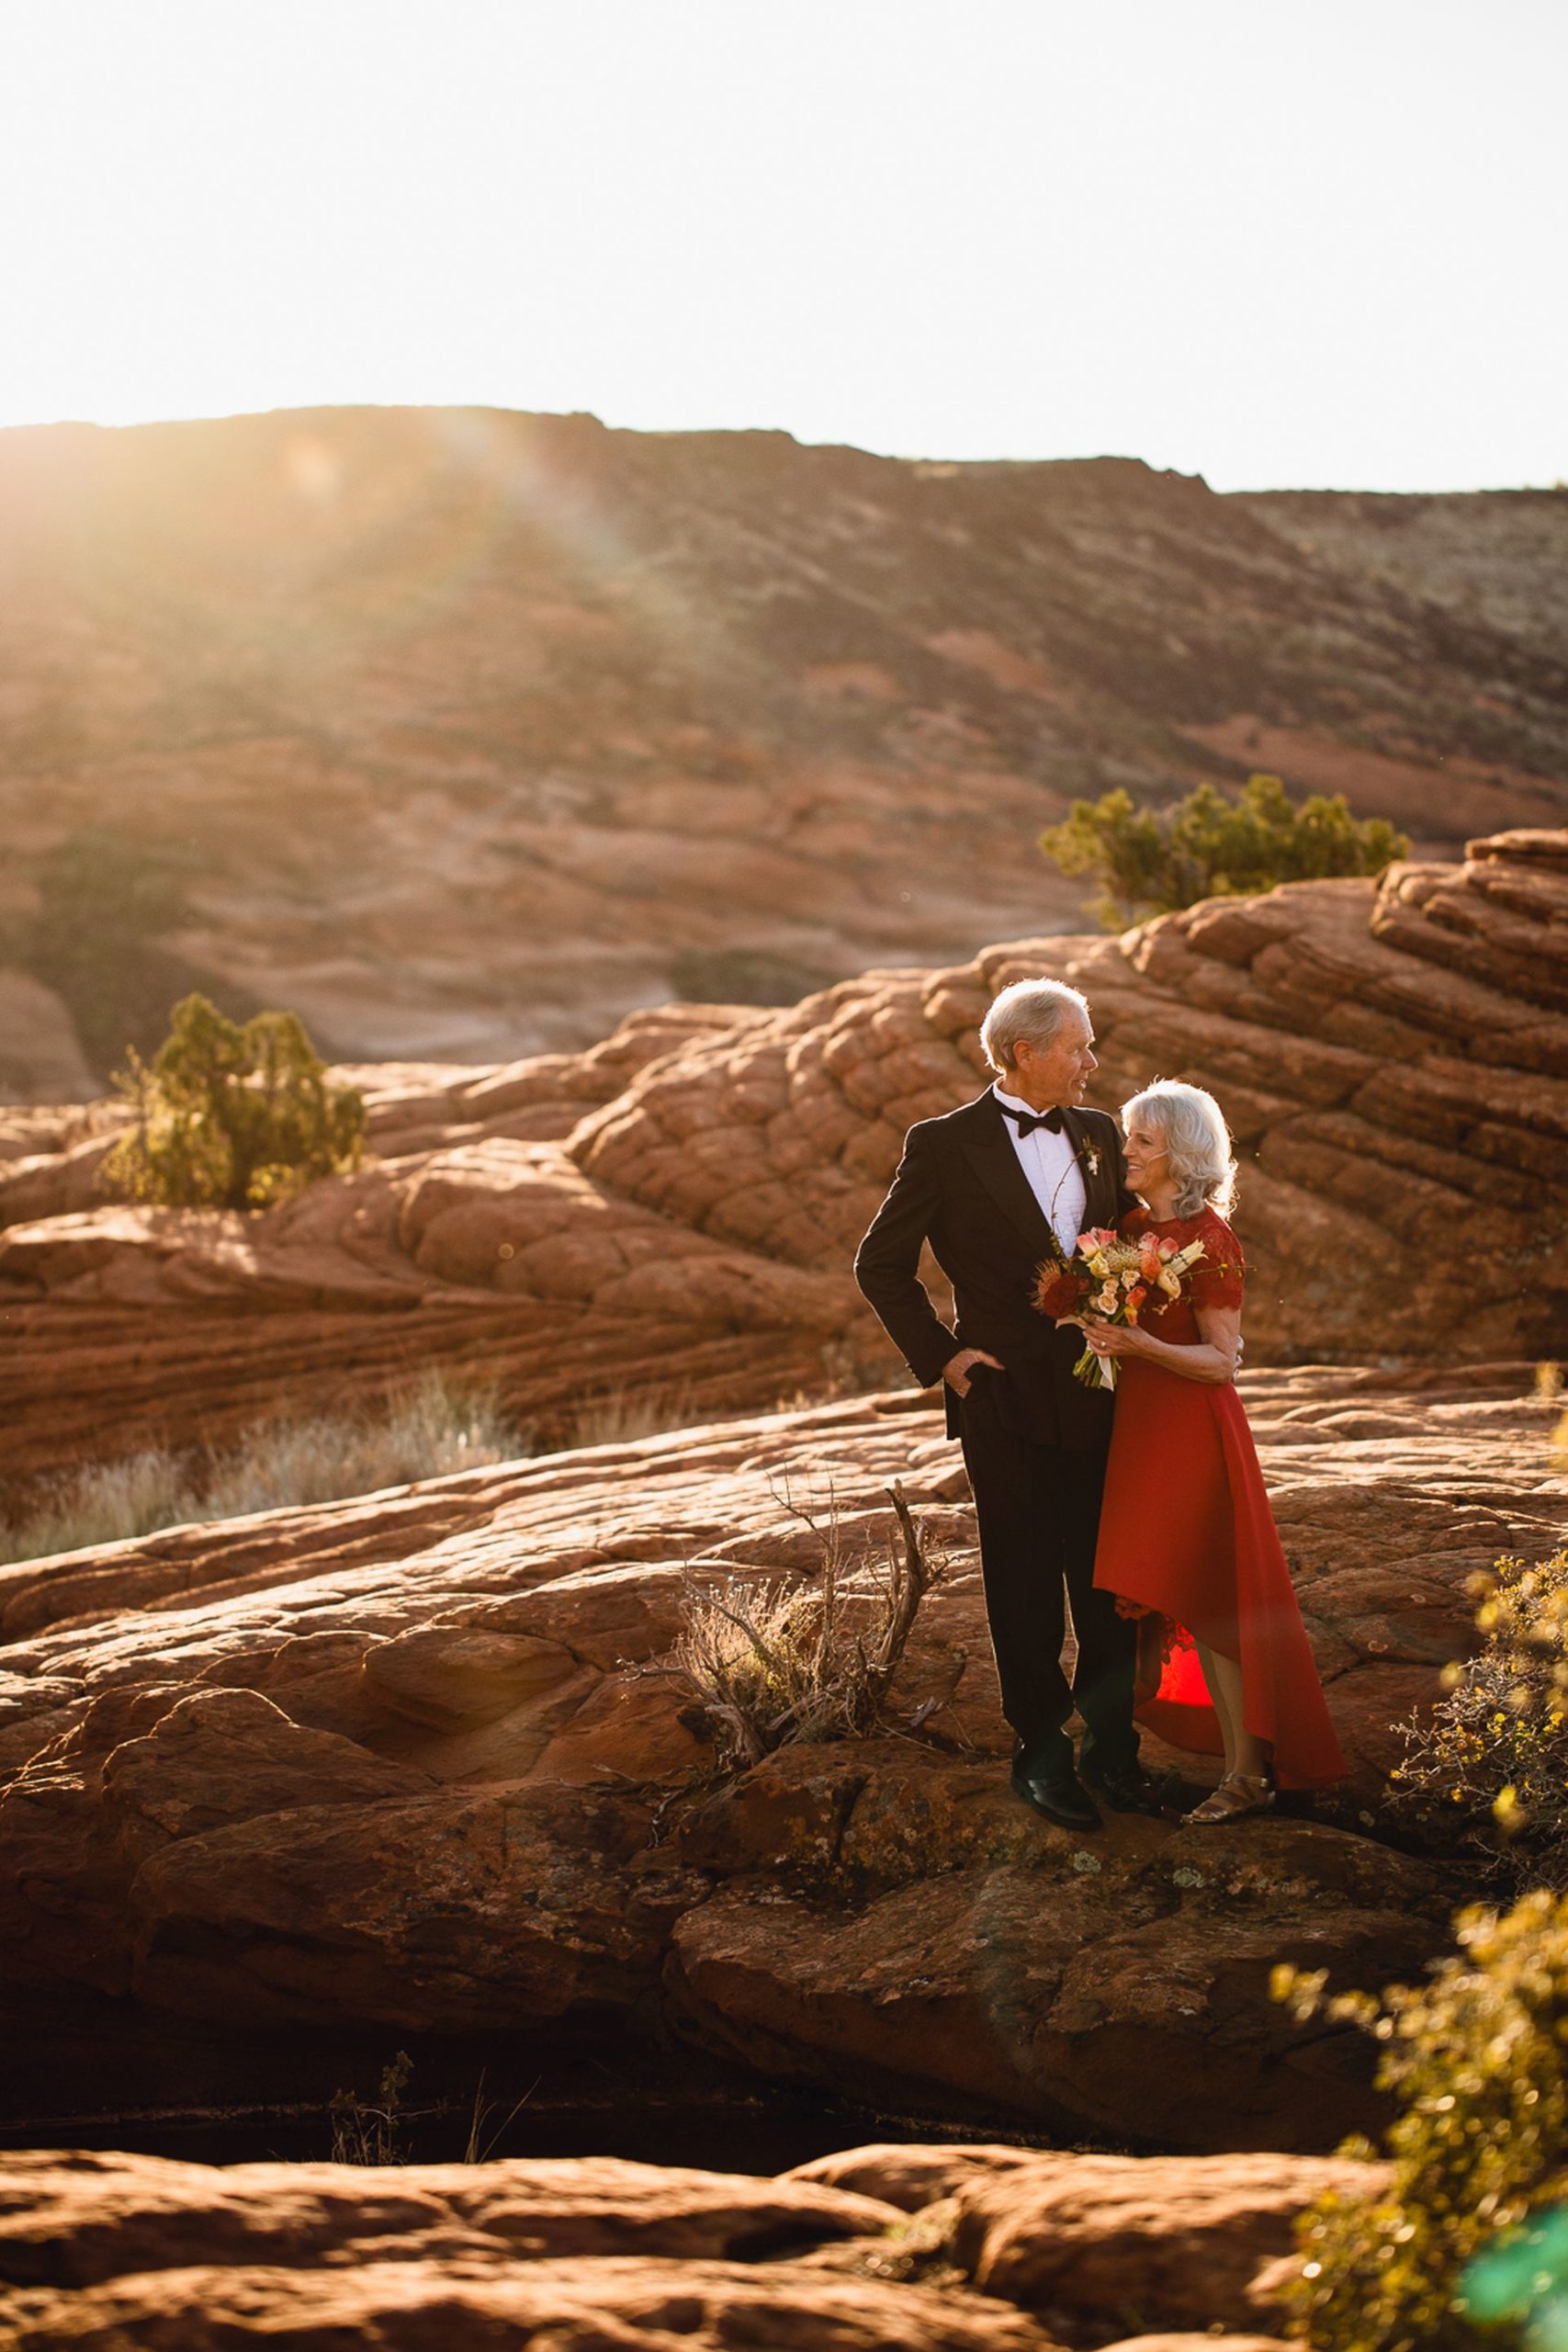 adventure elopement utah desert - recently married couple in the afternoon sun before breathtaking mountain view